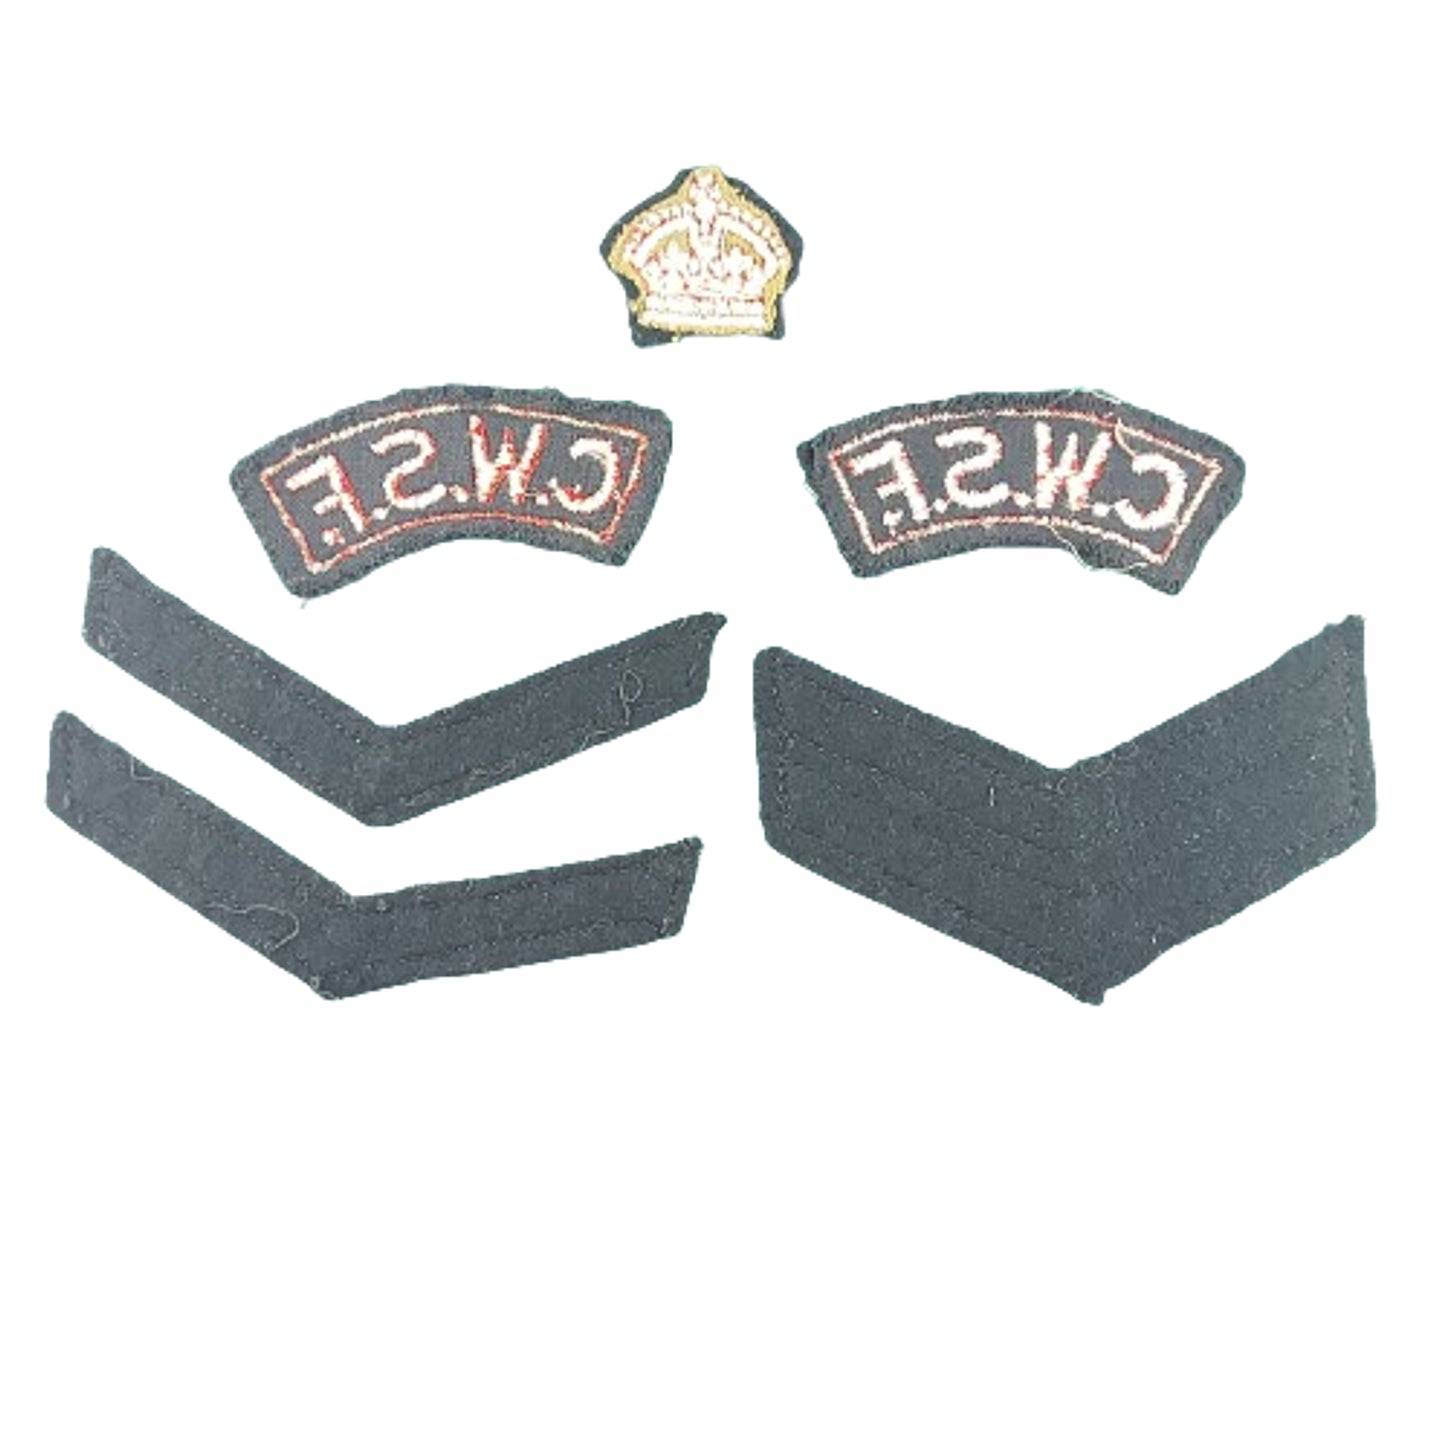 WW2 CWSF Canadian Women’s Service Force Insignia Set